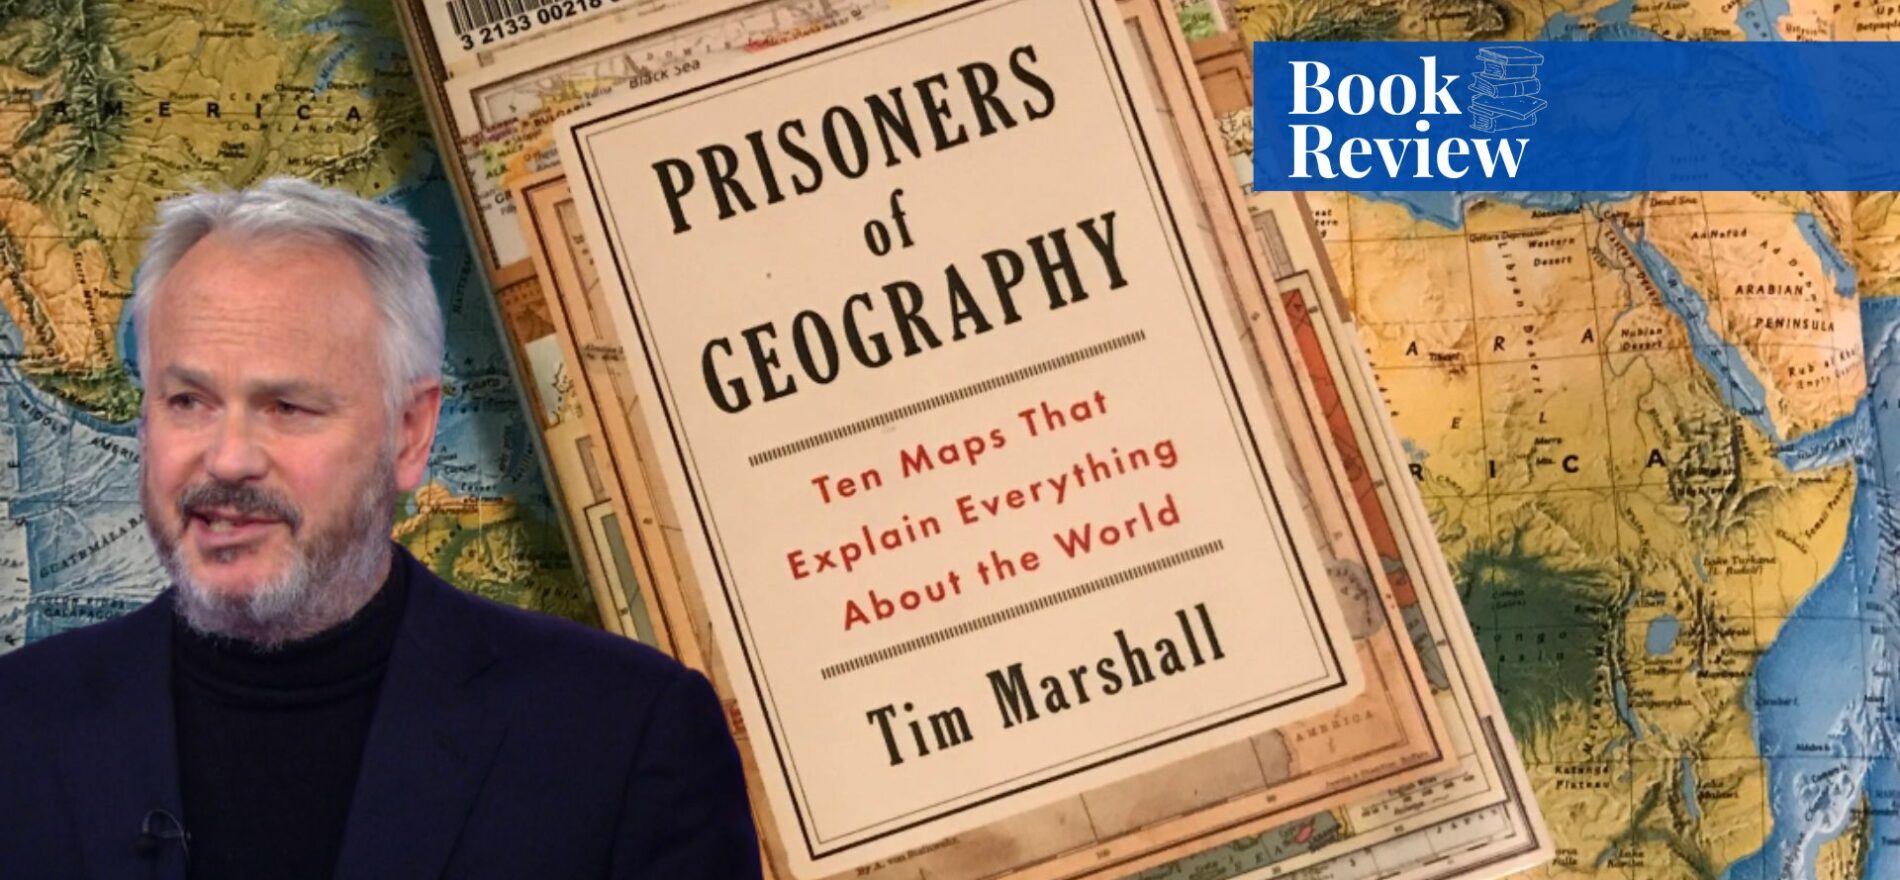 prisoners of geography